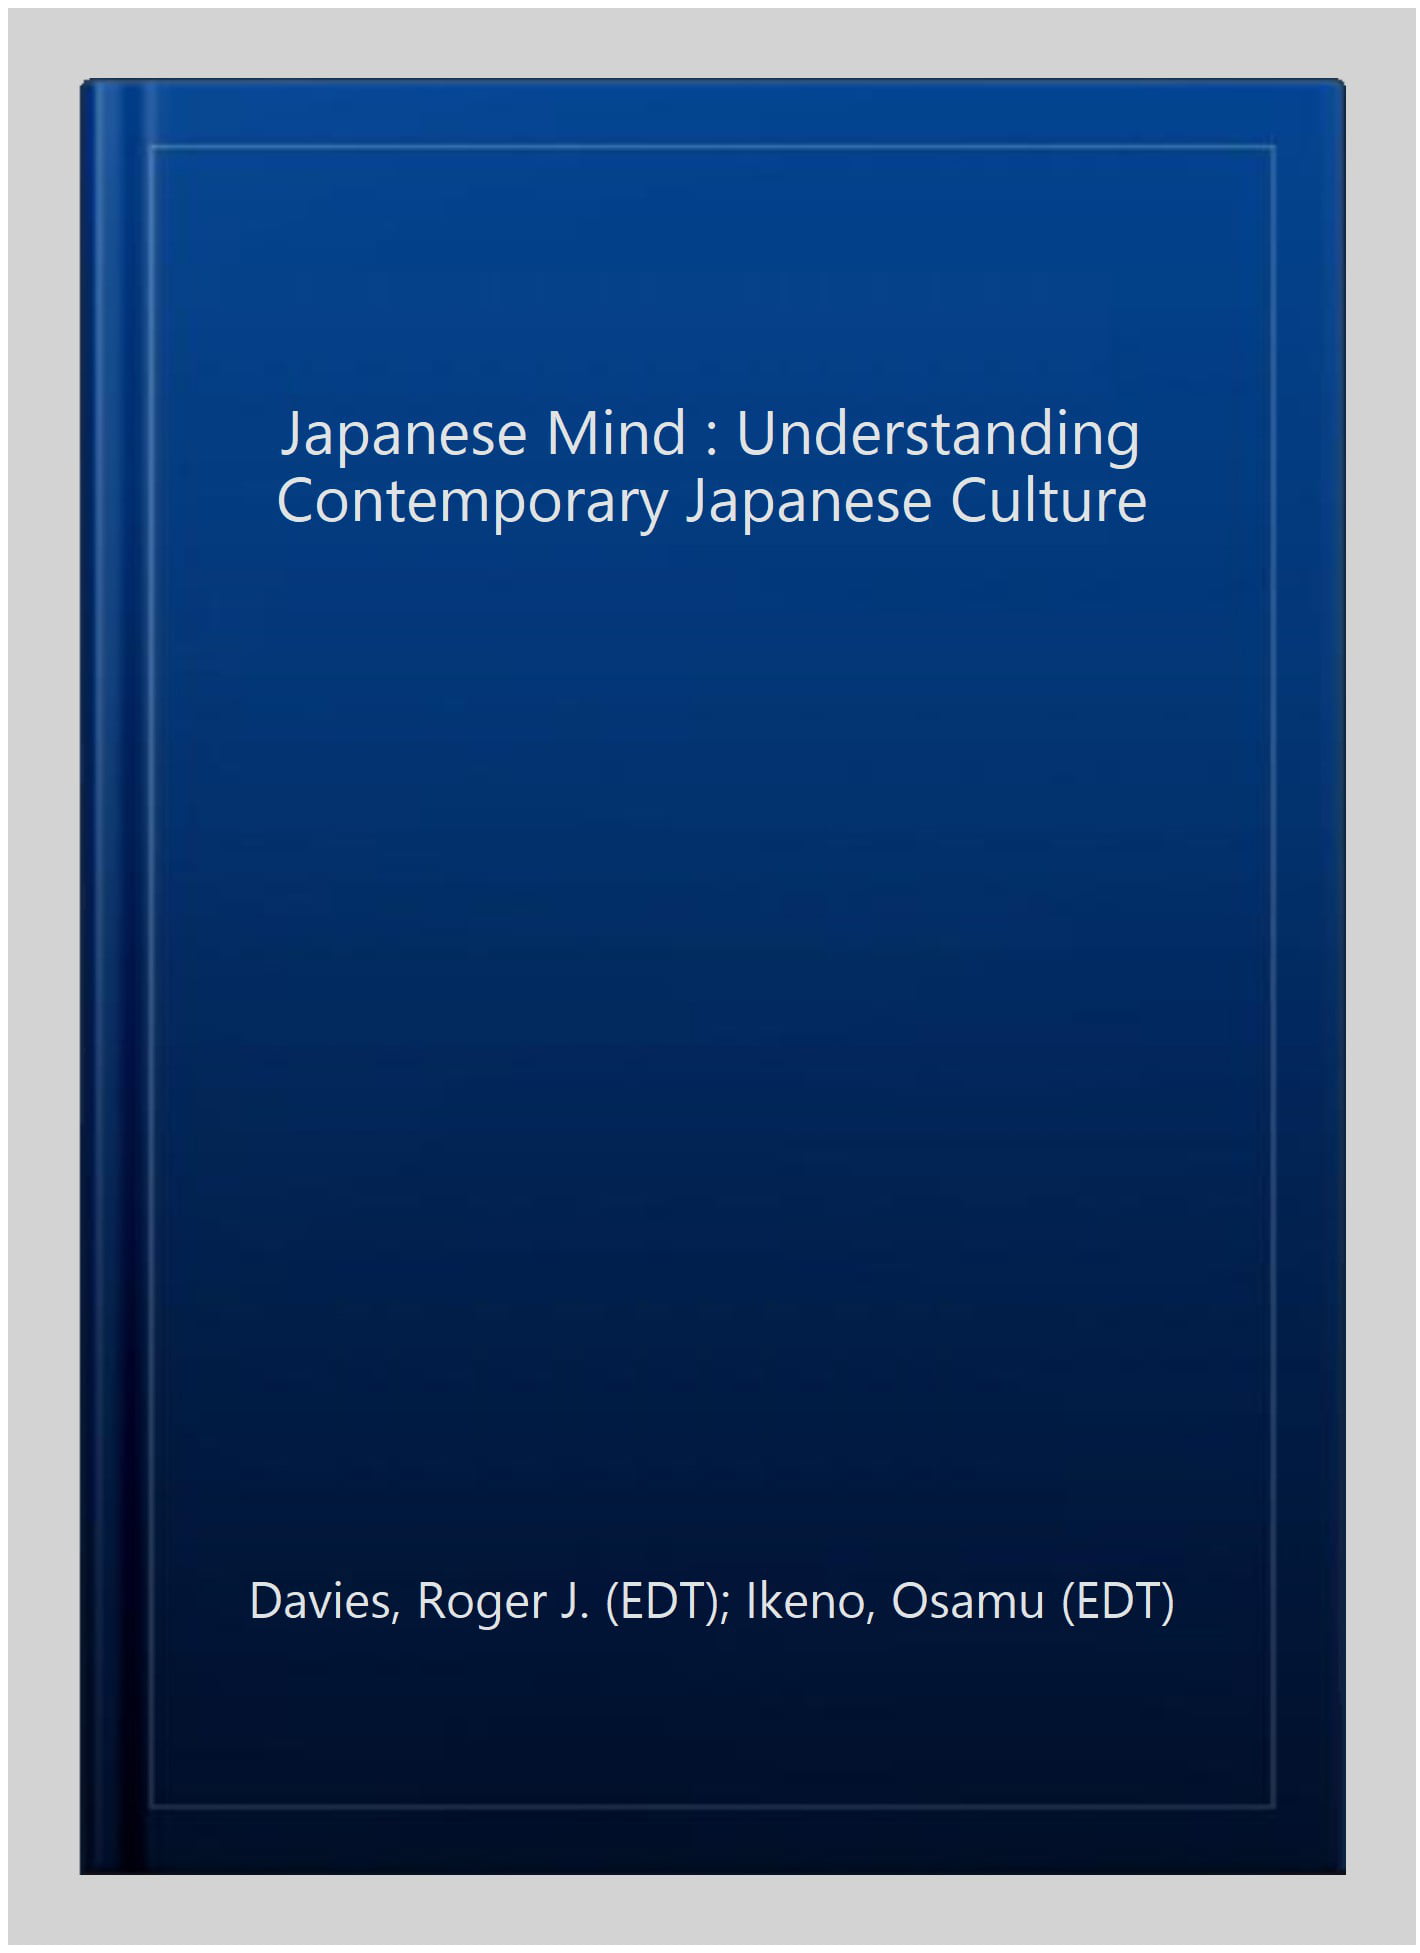 by　Understanding　Pre-owned　Mind　ISBN　Culture,　Japanese　Ikeno,　Contemporary　(EDT),　ISBN-13　Japanese　(EDT);　Paperback　Davies,　0804832951,　Roger　J.　Osamu　9780804832953